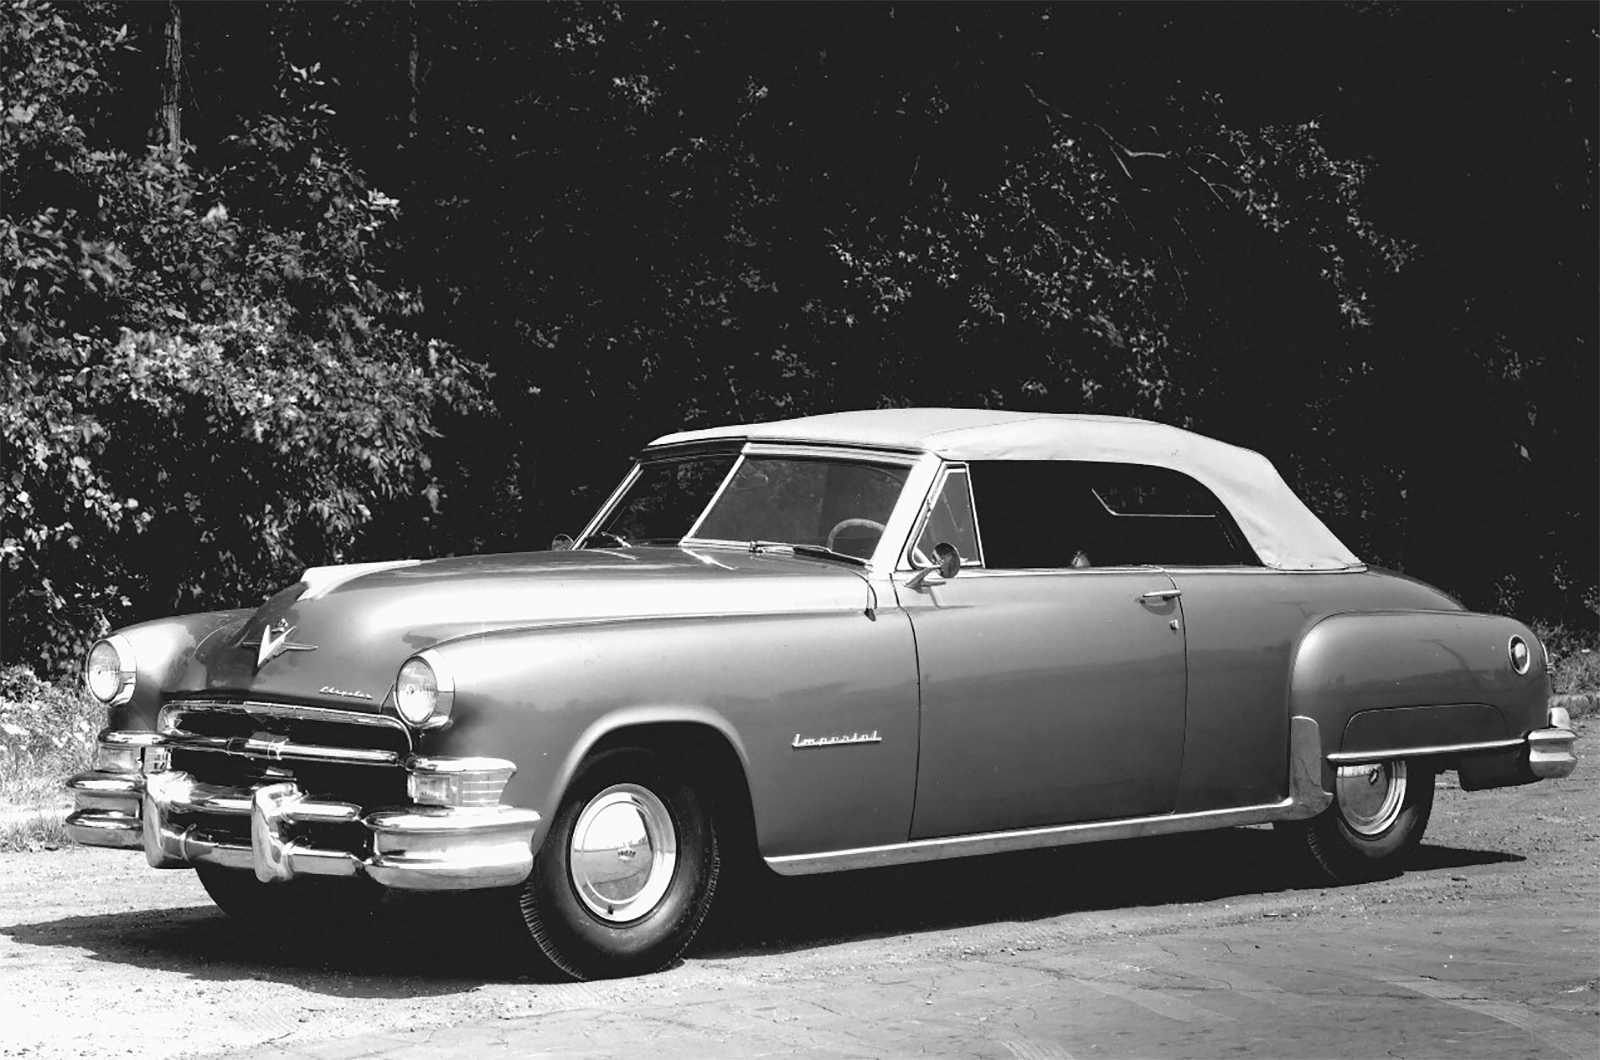 <p>Until <strong>Chrysler's Imperial</strong> lineup started to offer power assisted steering (PAS) on its 1951 models, drivers just had to accept that driving heavy cars in town was a pain. <strong>PAS</strong> made a profound impact; prior to that, a driver’s physical strength, or lack of it, was a key consideration when buying a car.</p><p>Imperial’s system was called <strong>Hydraguide</strong>, but it didn’t have a monopoly for long; GM quickly followed suit, and by 1956 25% of all cars on US roads had the feature; today the figure is virtually 100%.</p><p><strong>GROUNDBREAKER SCORE: 9 - </strong>today, even the largest cars can be driven by anyone.</p>